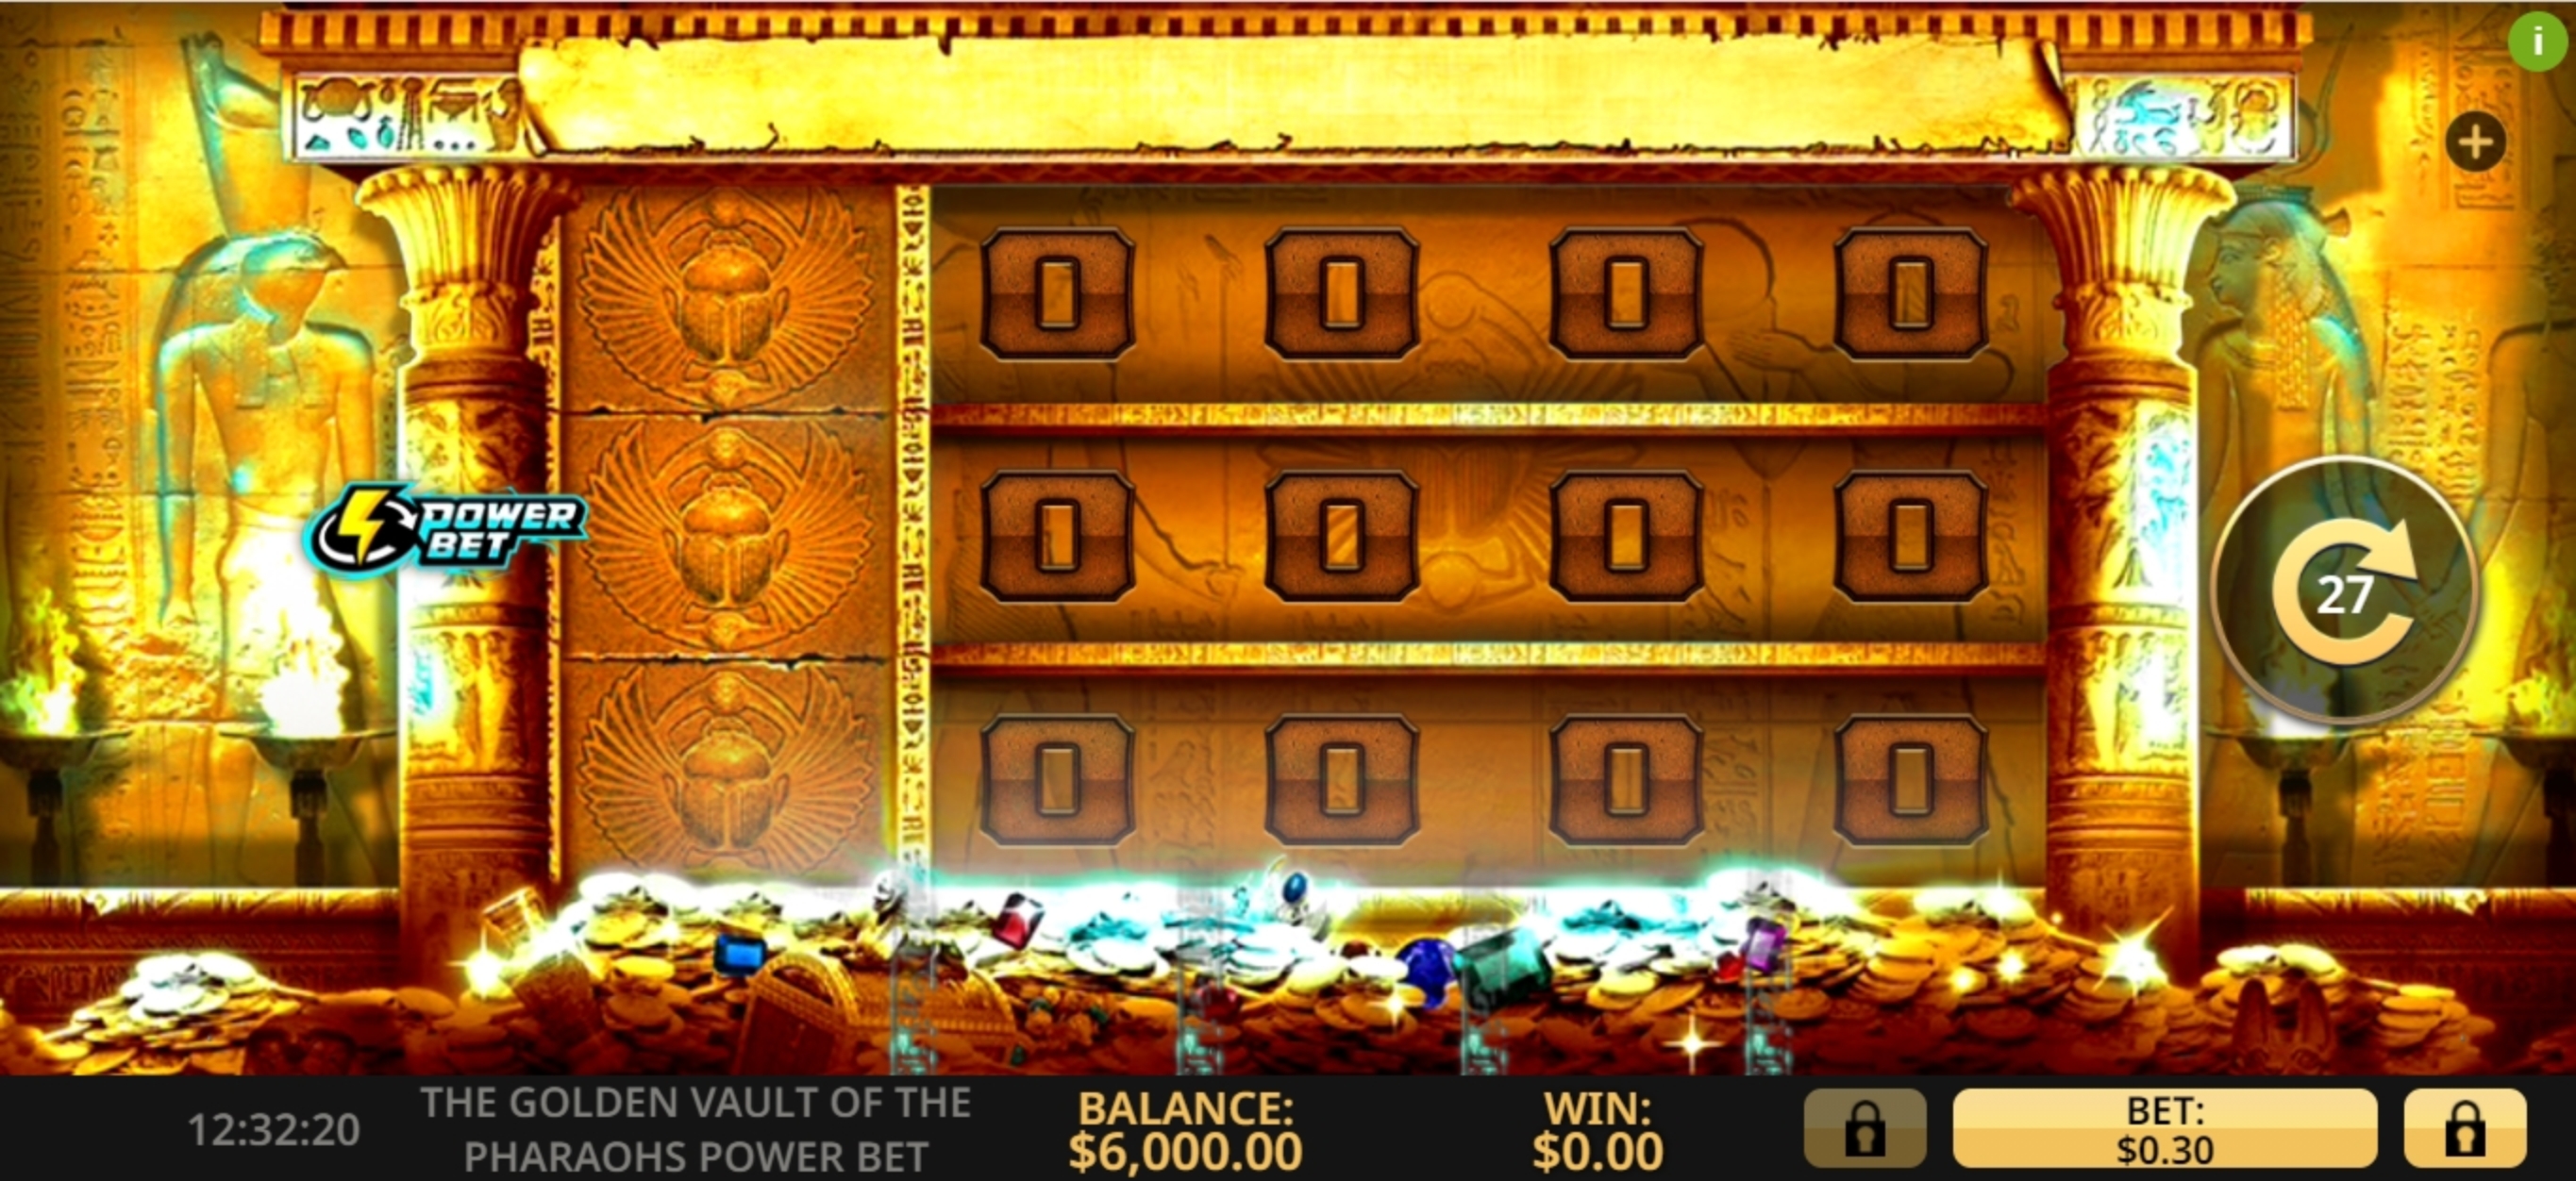 Reels in The Golden Vault Of The Pharaohs Power Bet Slot Game by High 5 Games